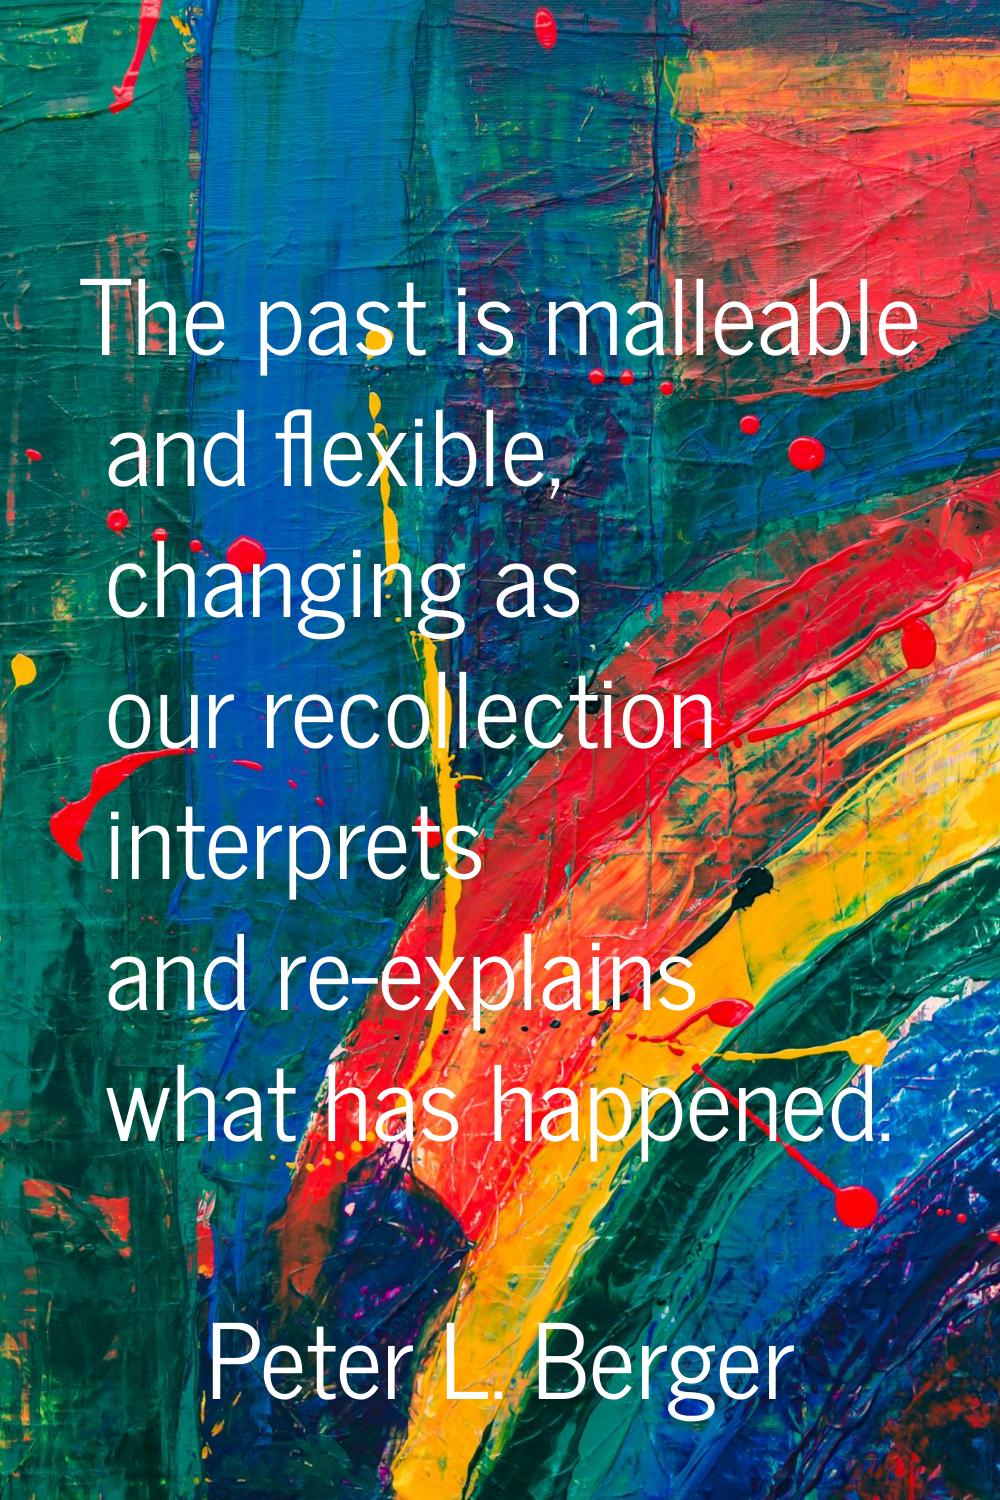 The past is malleable and flexible, changing as our recollection interprets and re-explains what ha